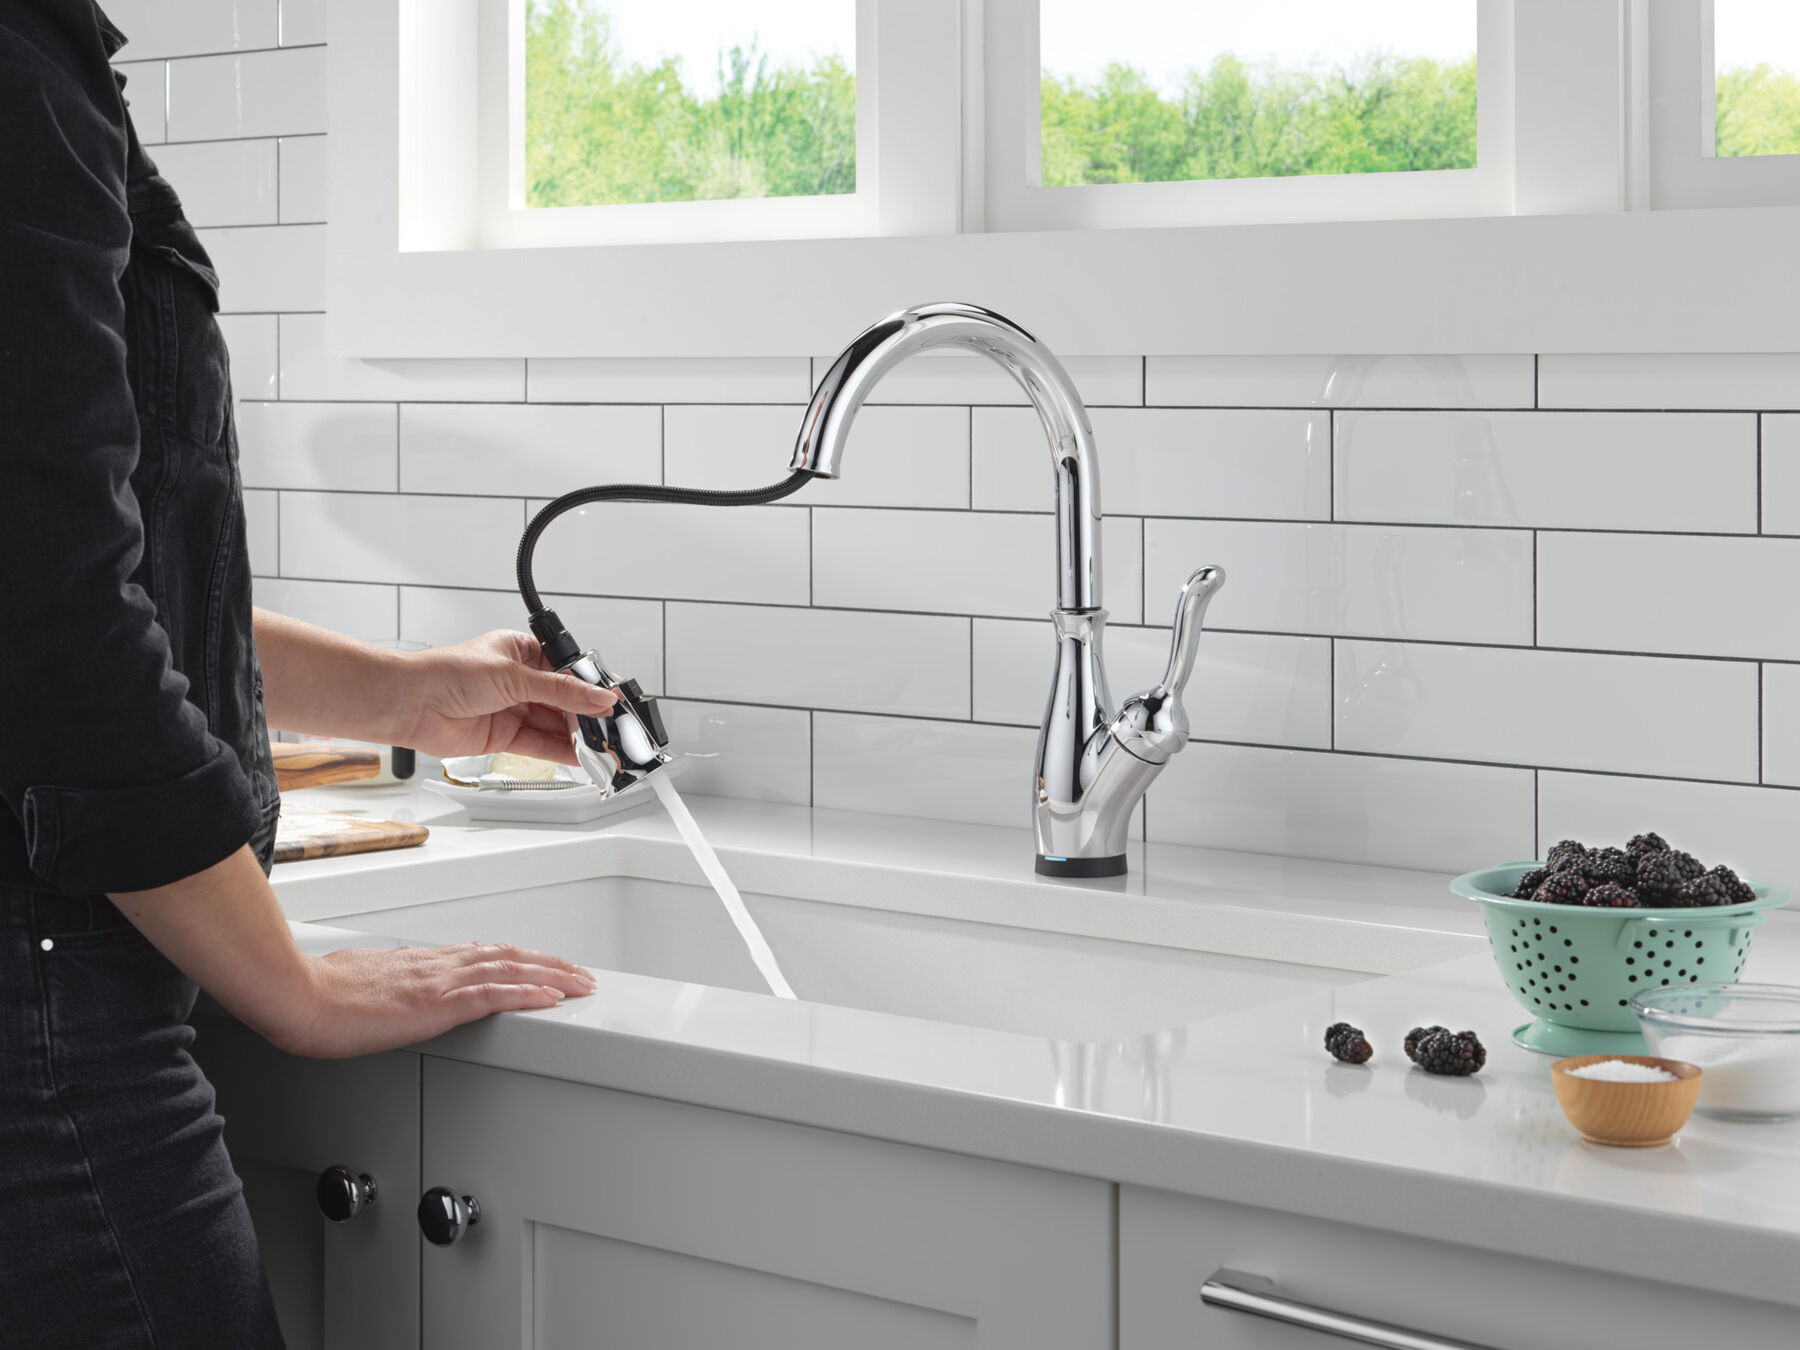 Touch2o Kitchen Faucet With Touchless